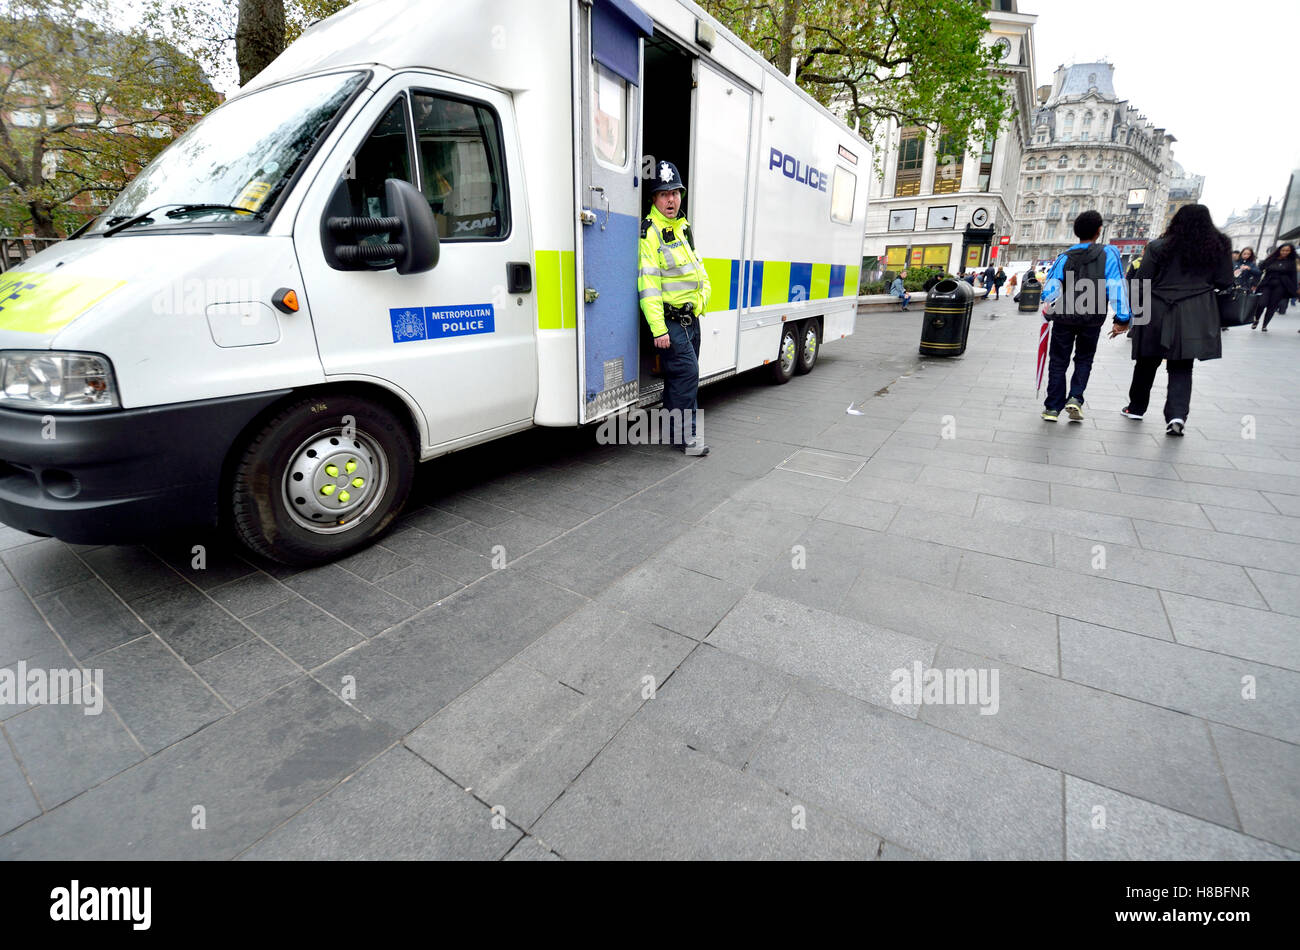 London, England, UK. Police officer with his van in Leicester Square Stock Photo